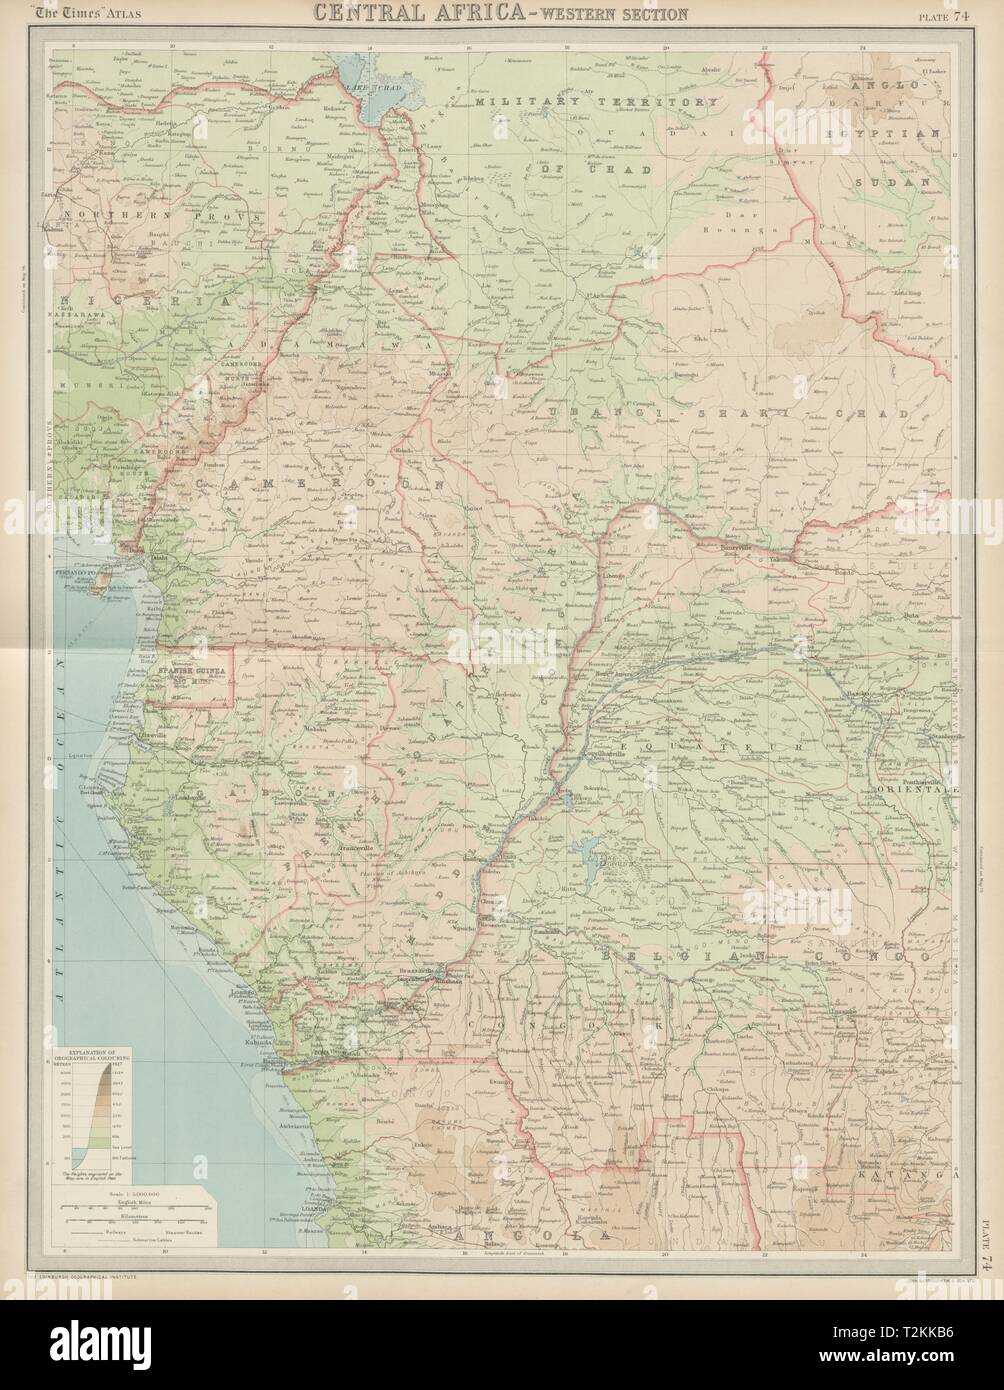 Colonial Central Africa. Belgian Congo. French Equatorial Africa ...